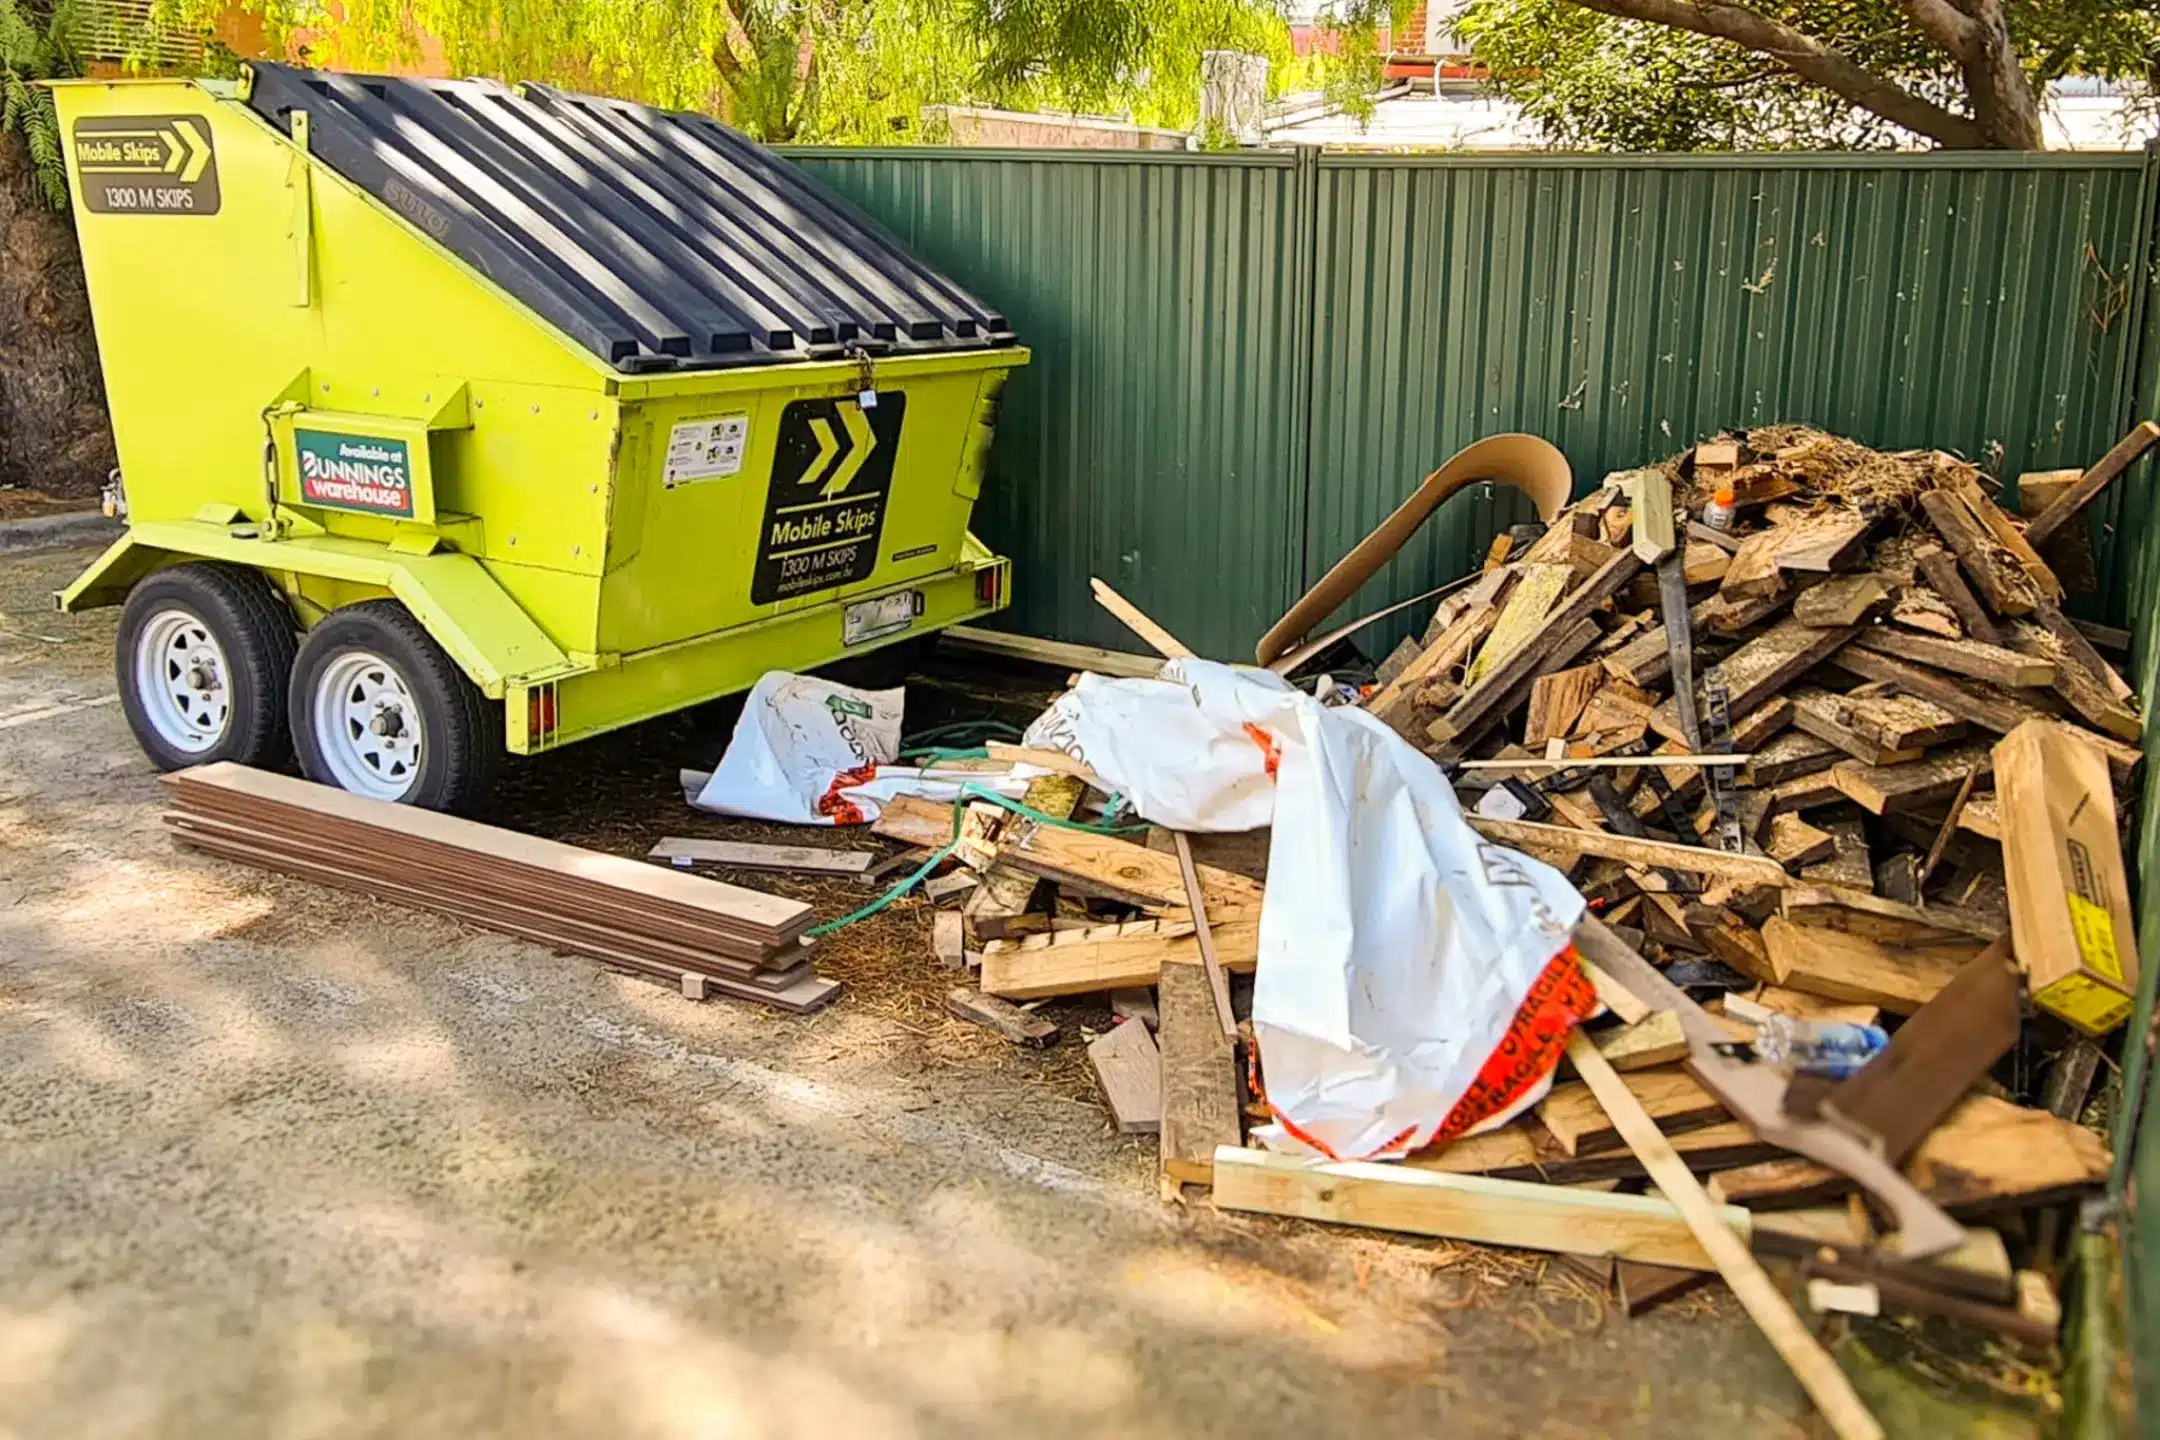 Image of mobile skips standard skip bin hire parked outside next to pile of rubbish to be removed - Skip bin hire Australia